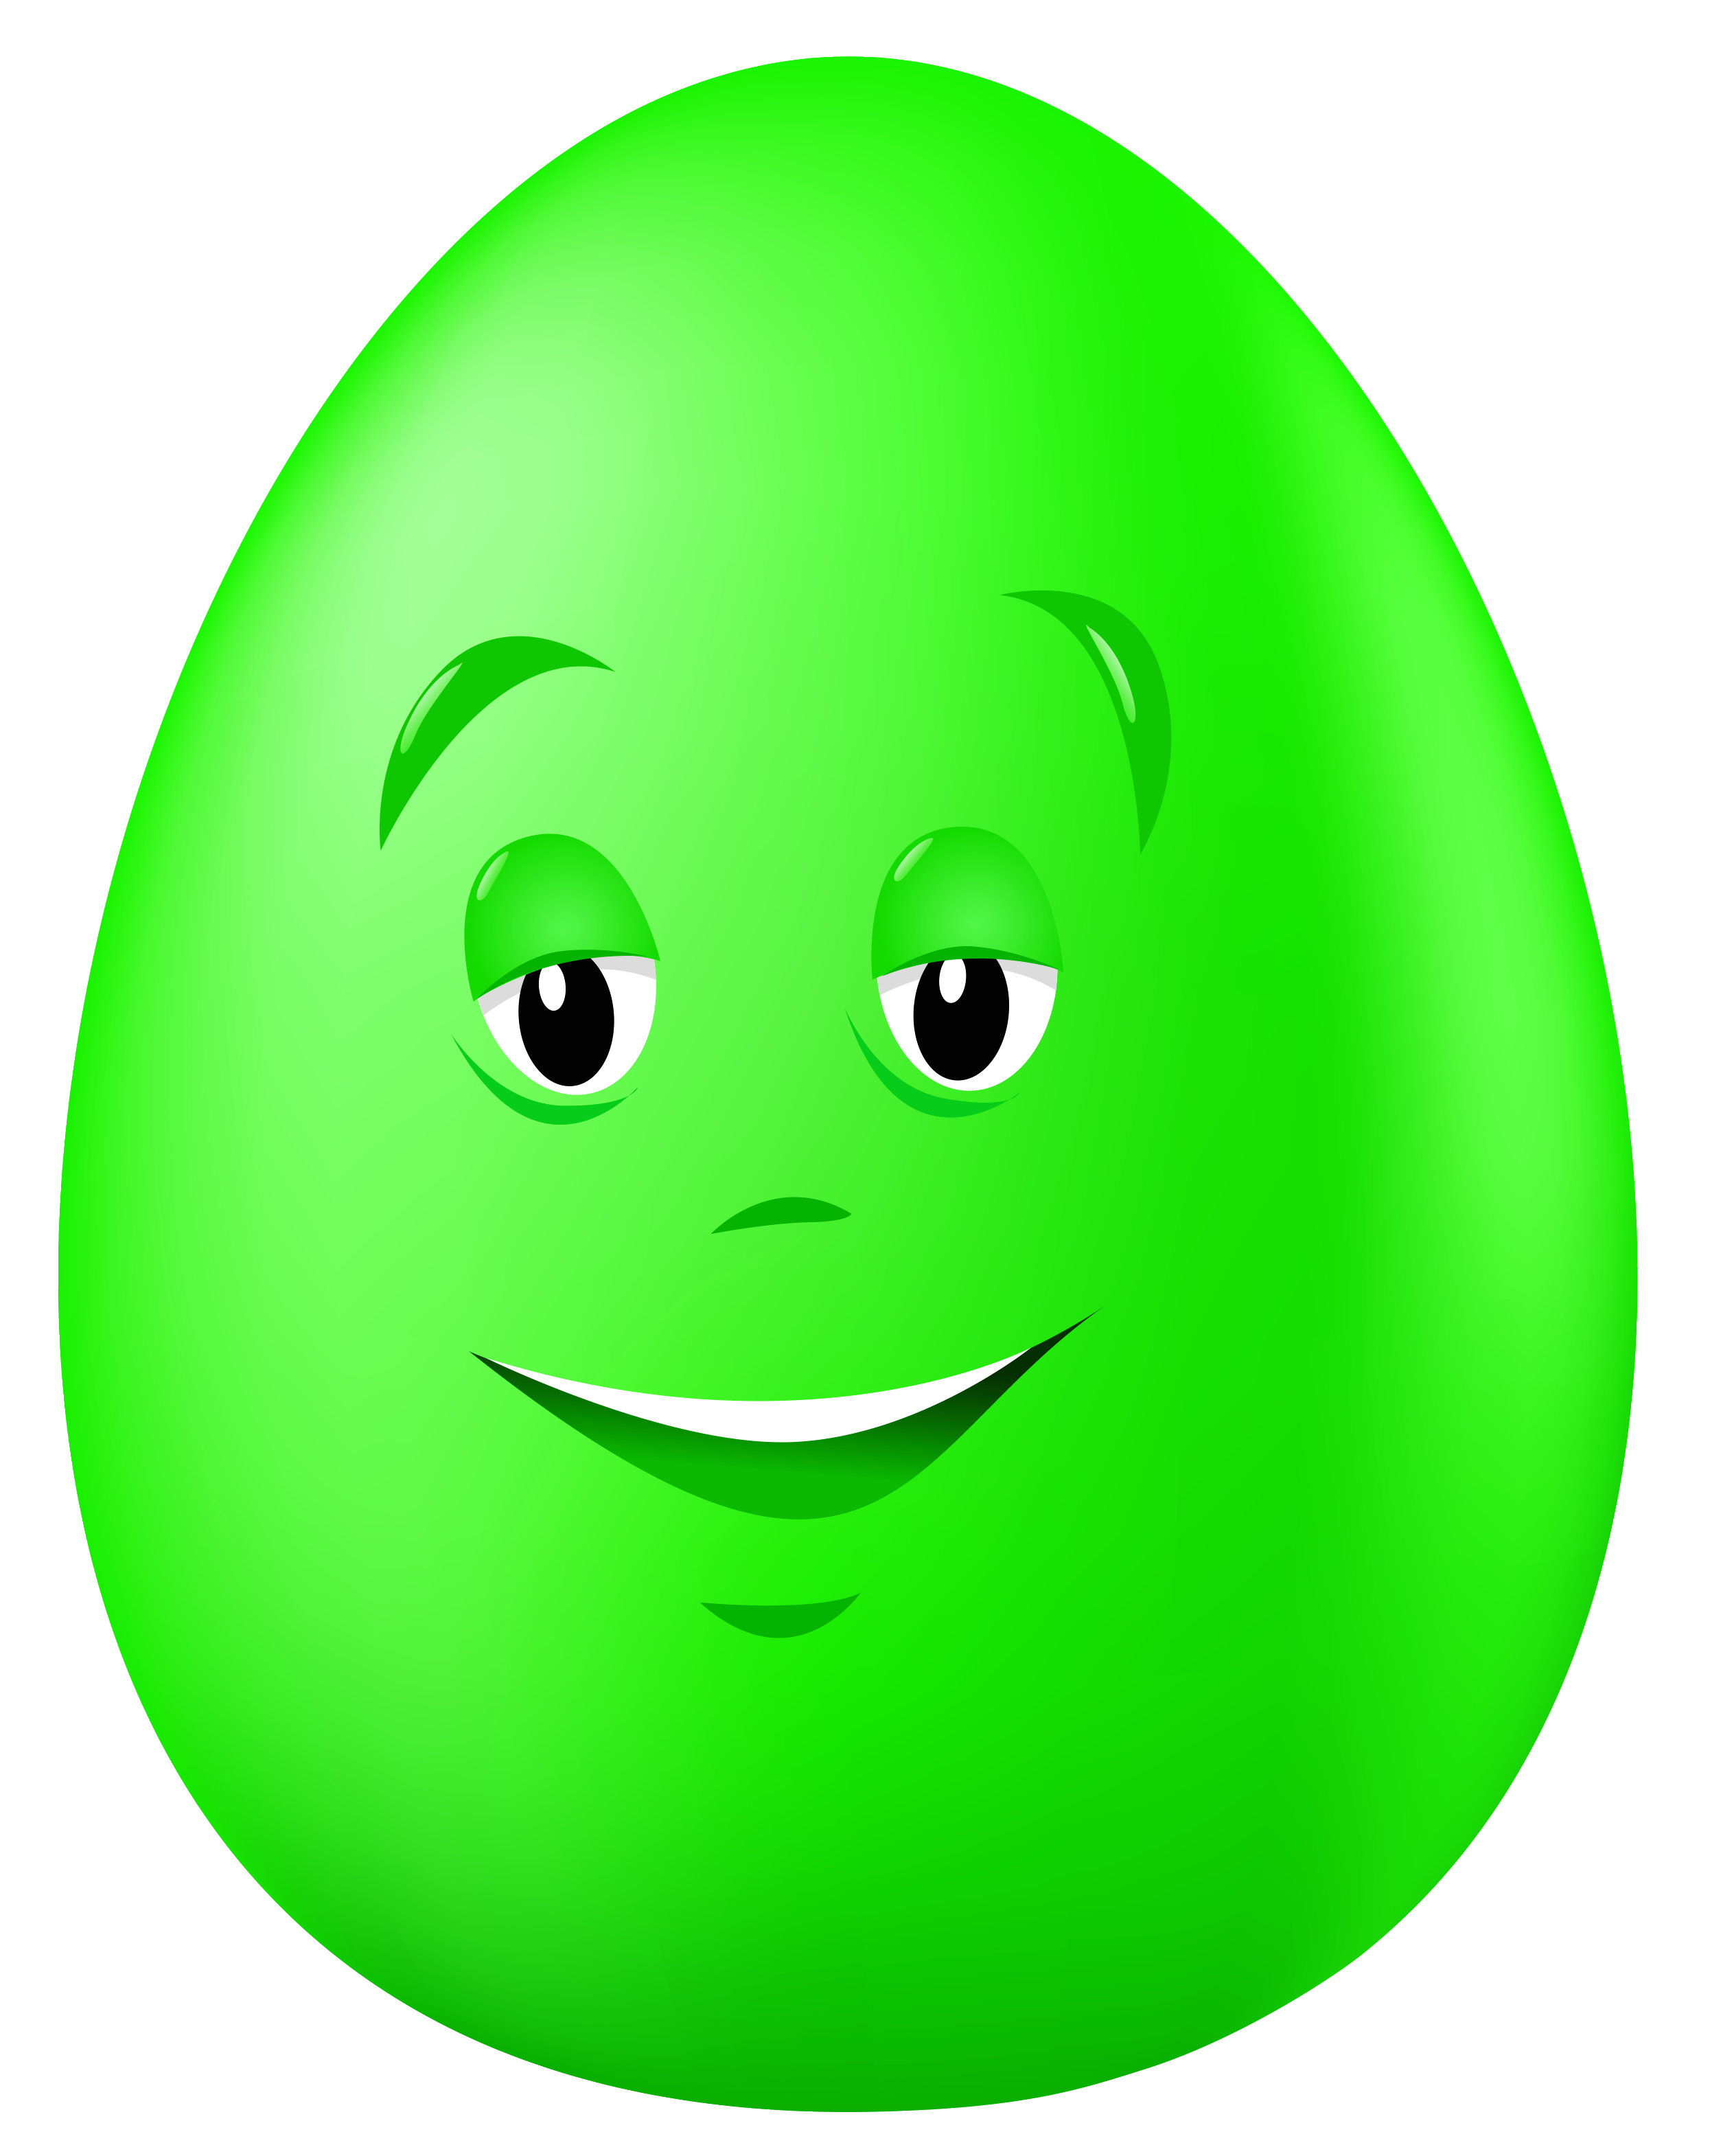 Transparent Easter Green Egg with Face PNG Clipart Picture